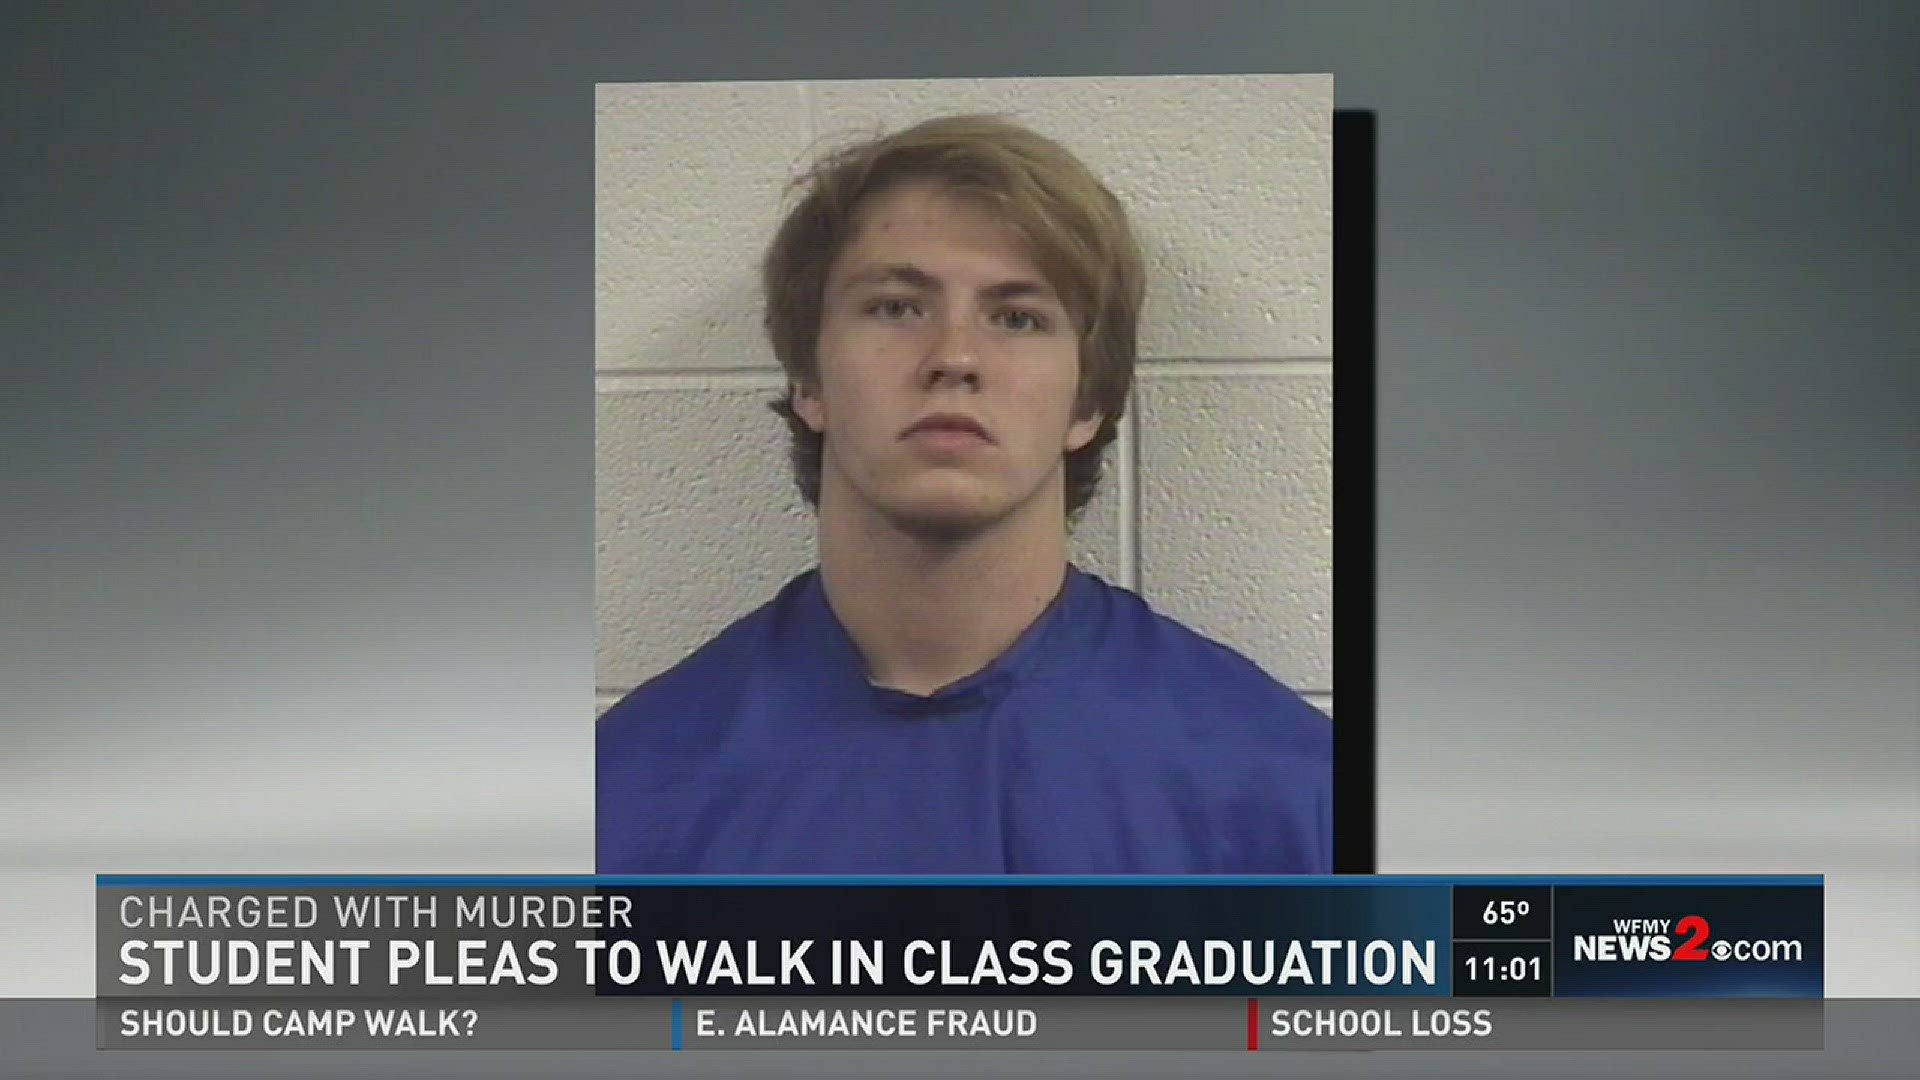 Student Charged with Murder Wants to Walk with Class at Graduation